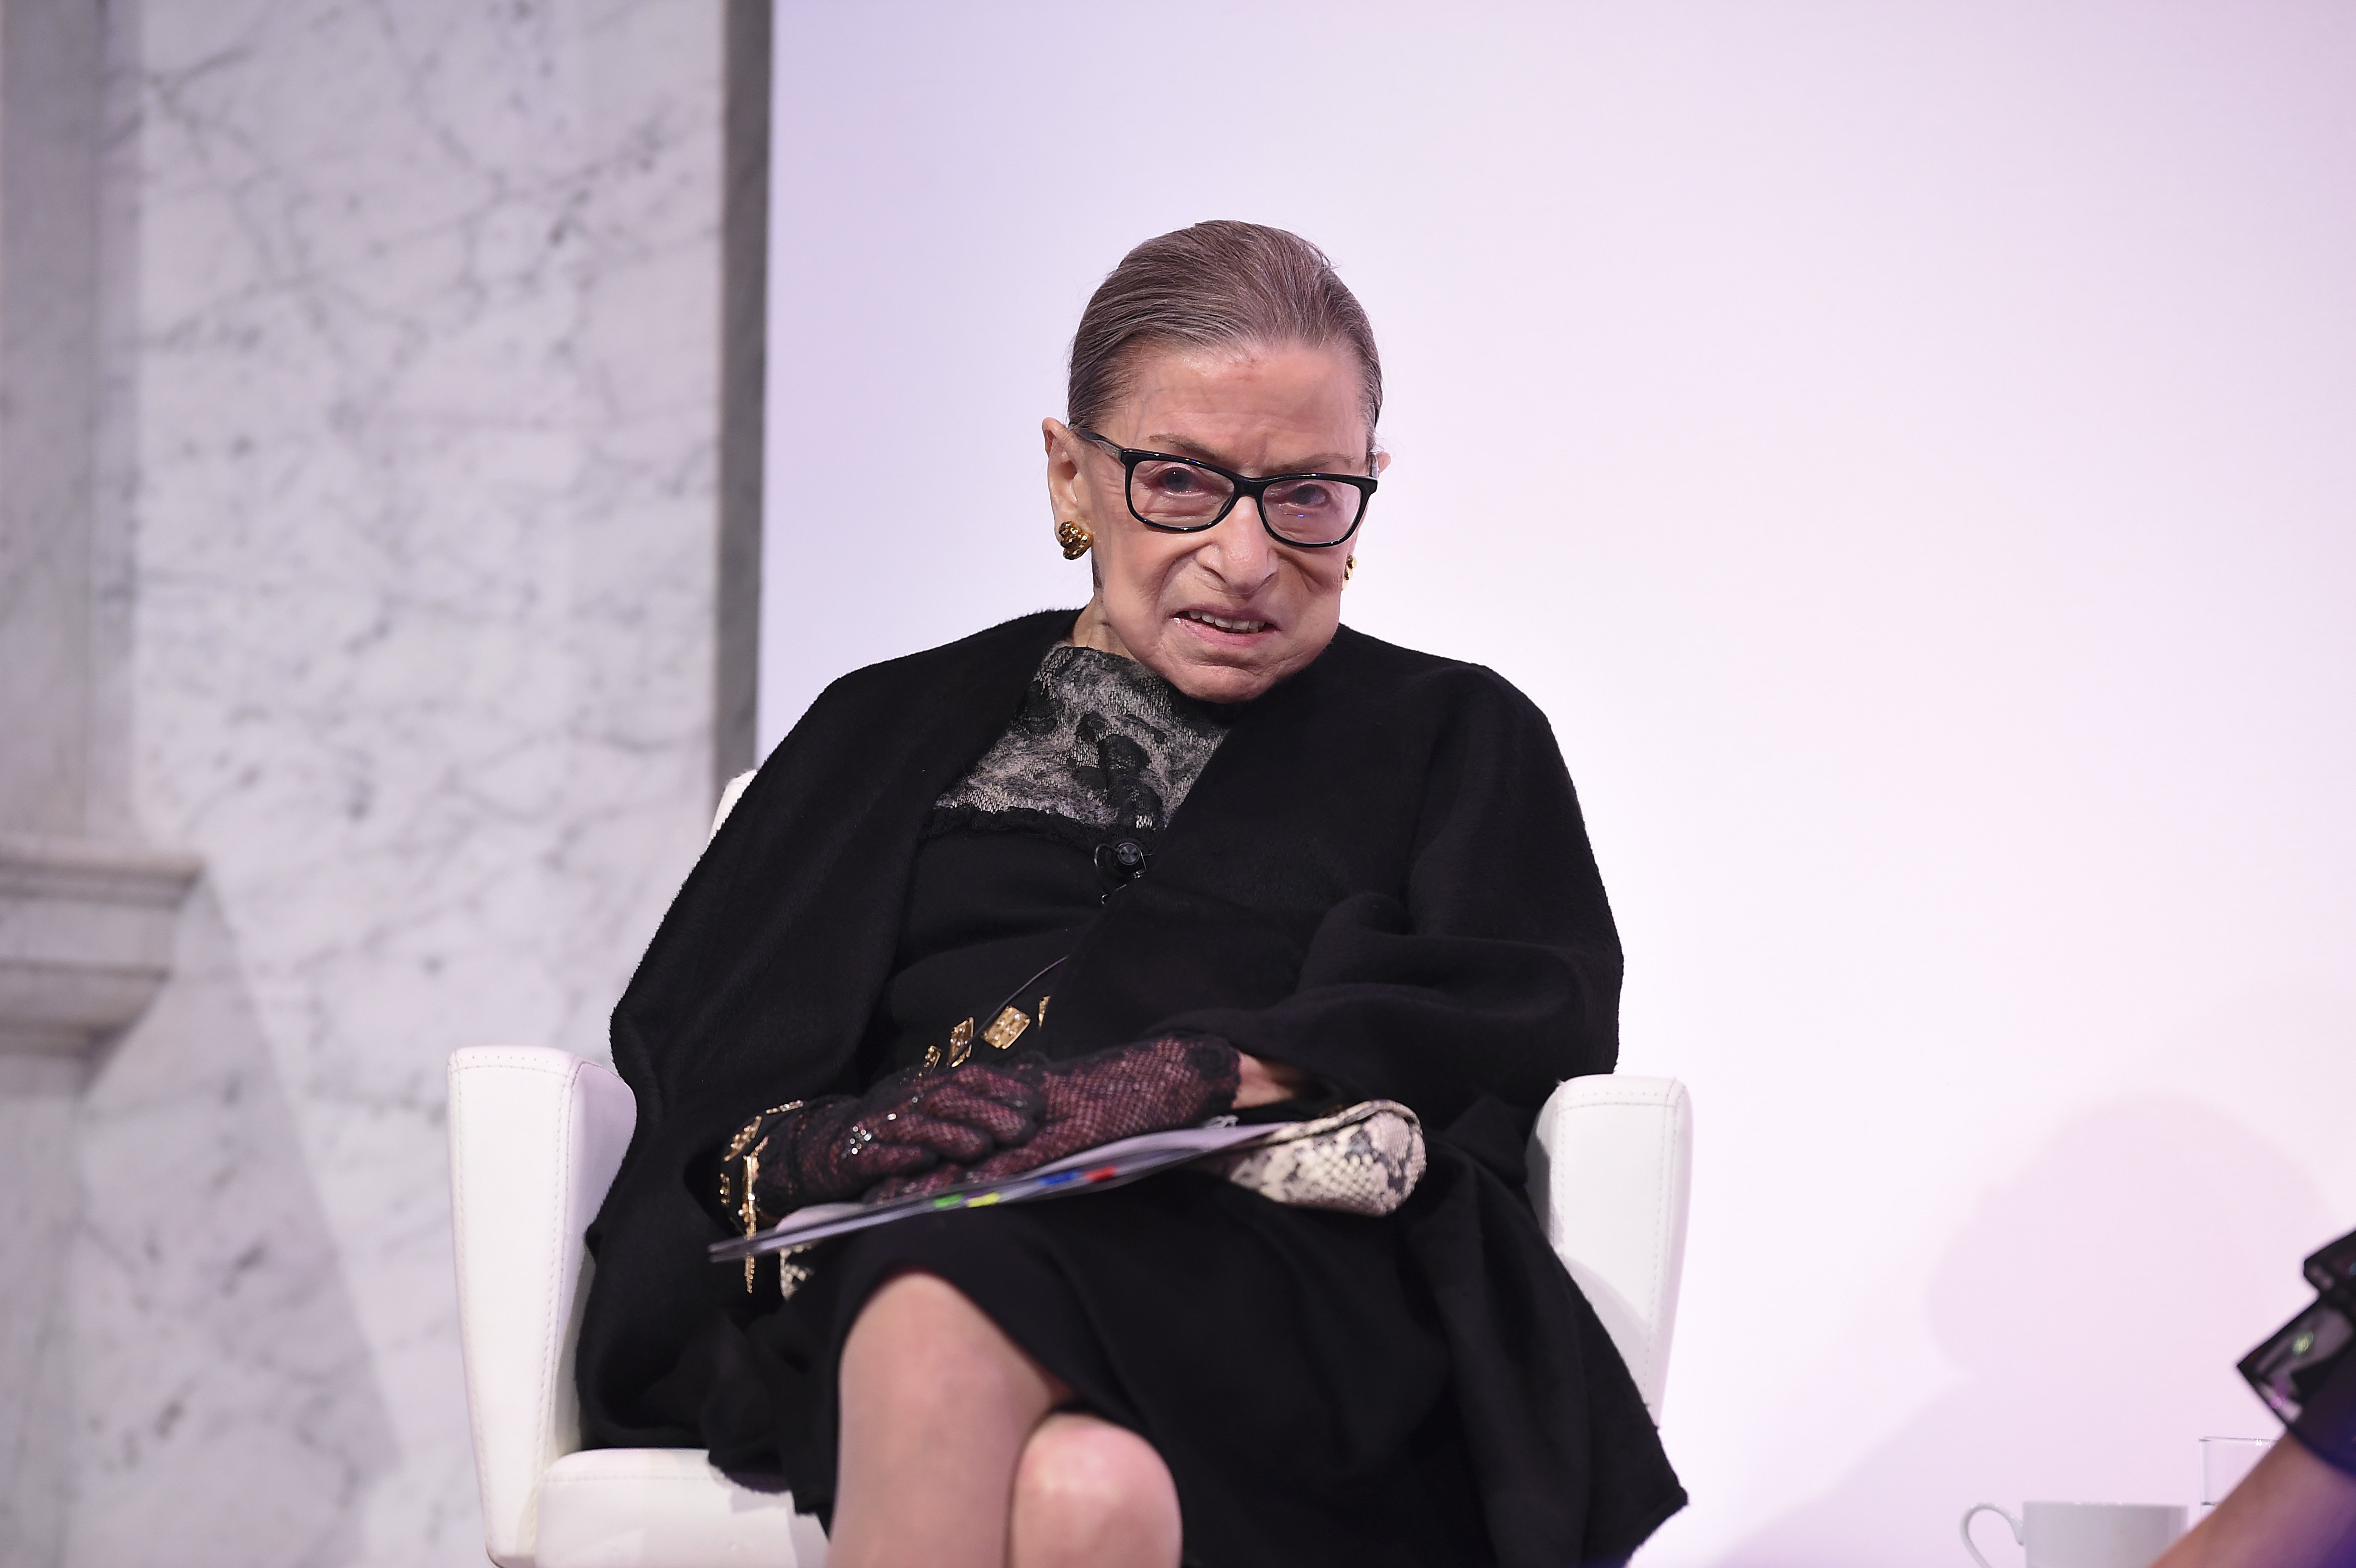 Justice Ruth Bader Ginsburg at the 2020 DVF Awards on February 19, 2020 | Photo: Getty Images